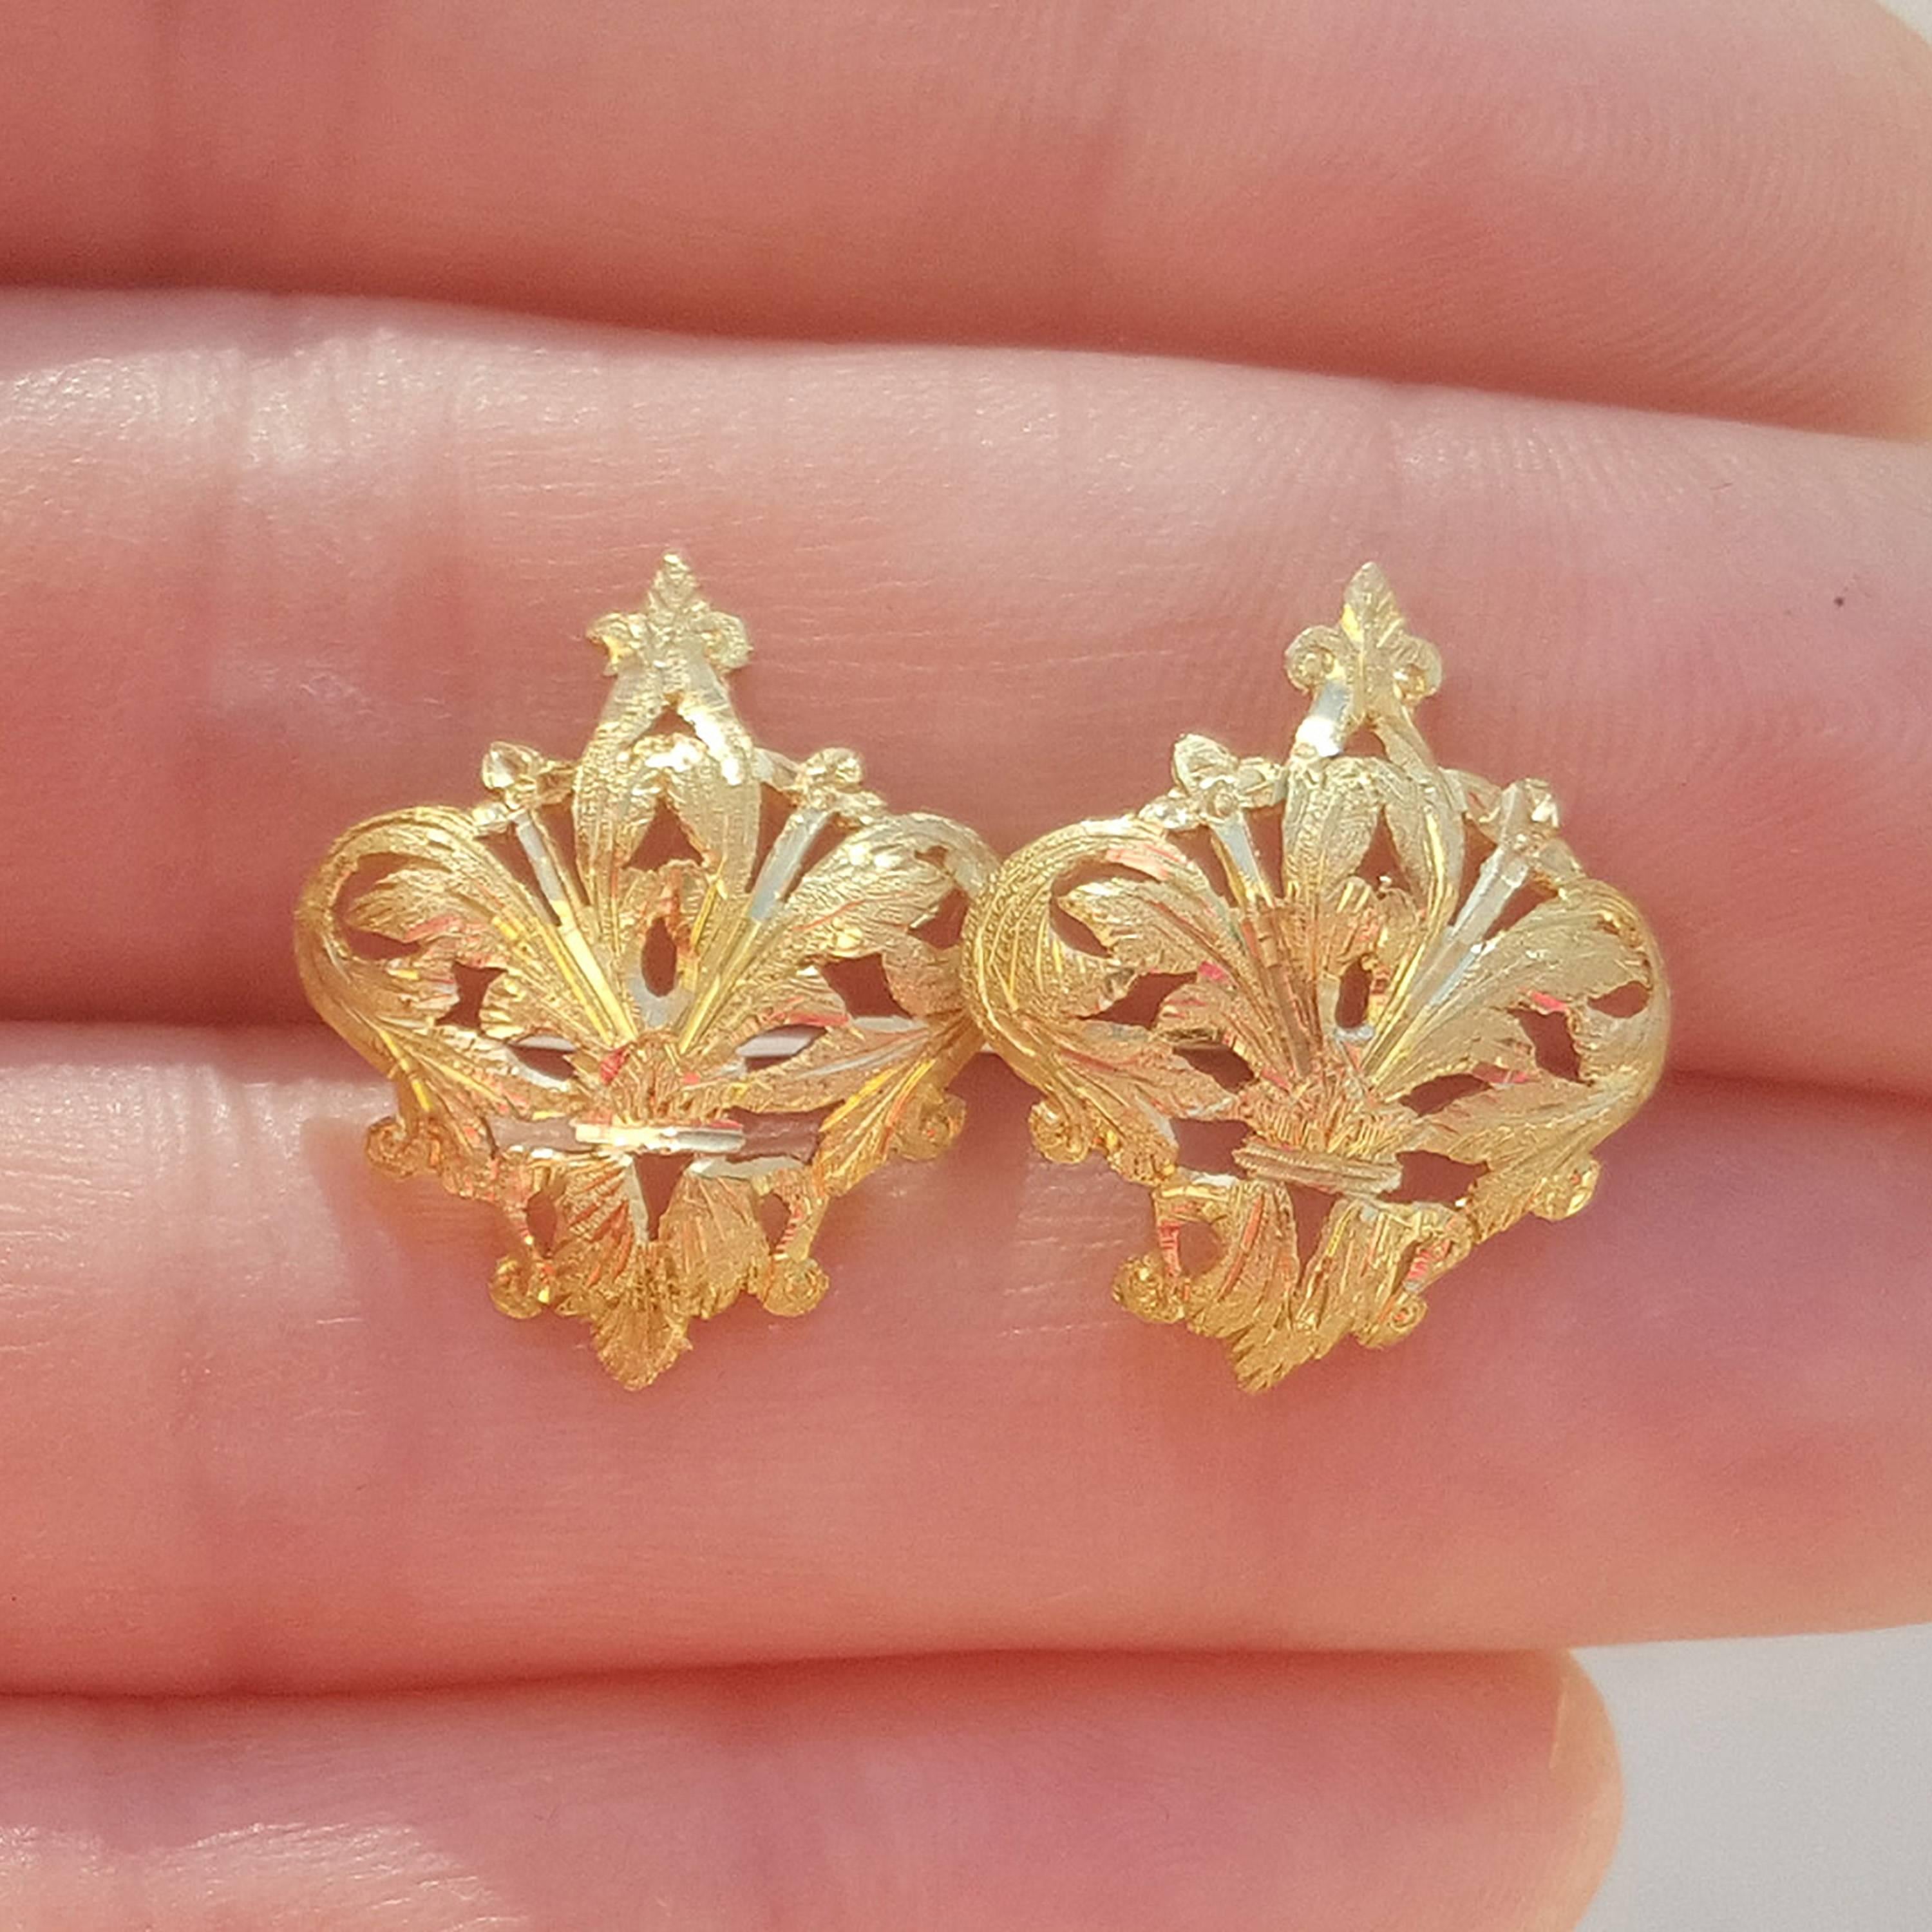 These earrings feature the timeless Fleur de Lis, which is the symbol of the city of Florence, Italy (where it is known as the Giglio).  This is a classic earring both in size and style, and will be a chic addition to your jewelry wardrobe.

-18kt